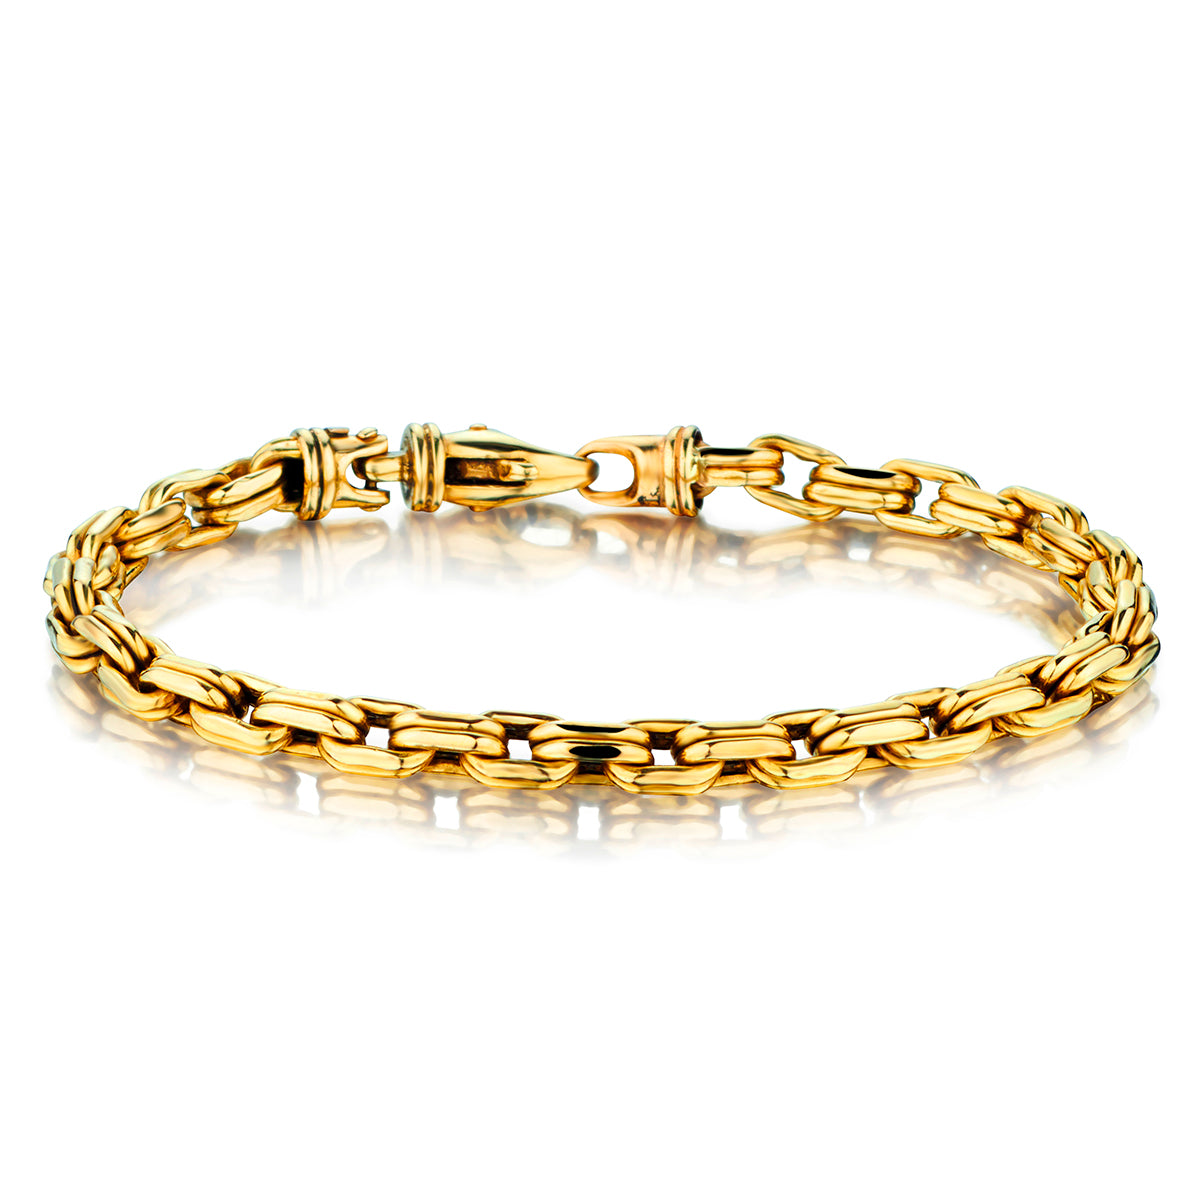 14kt Yellow Gold Bracelet. Made in Italy.